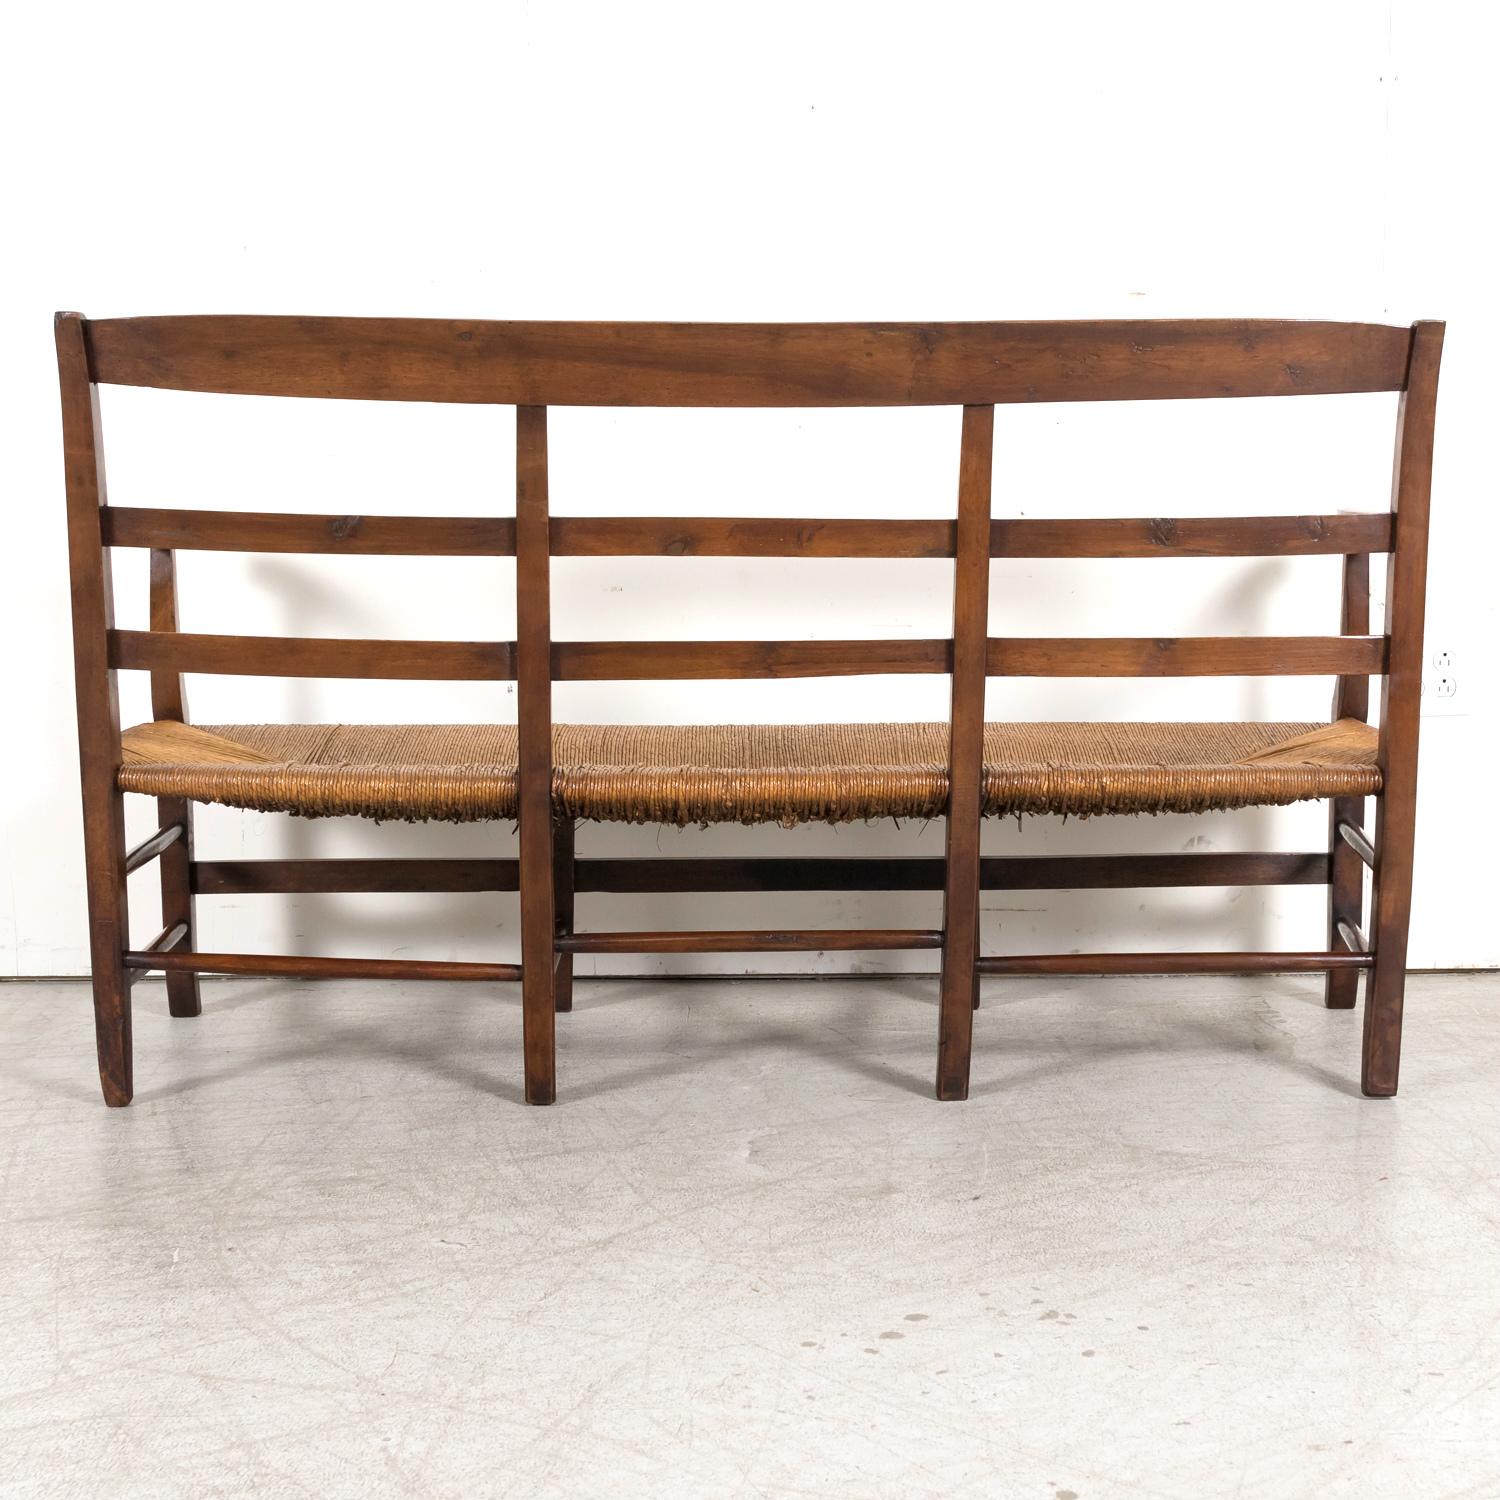 Mid-19th Century French Radassier or Ladder Back Rush Seat Bench 14